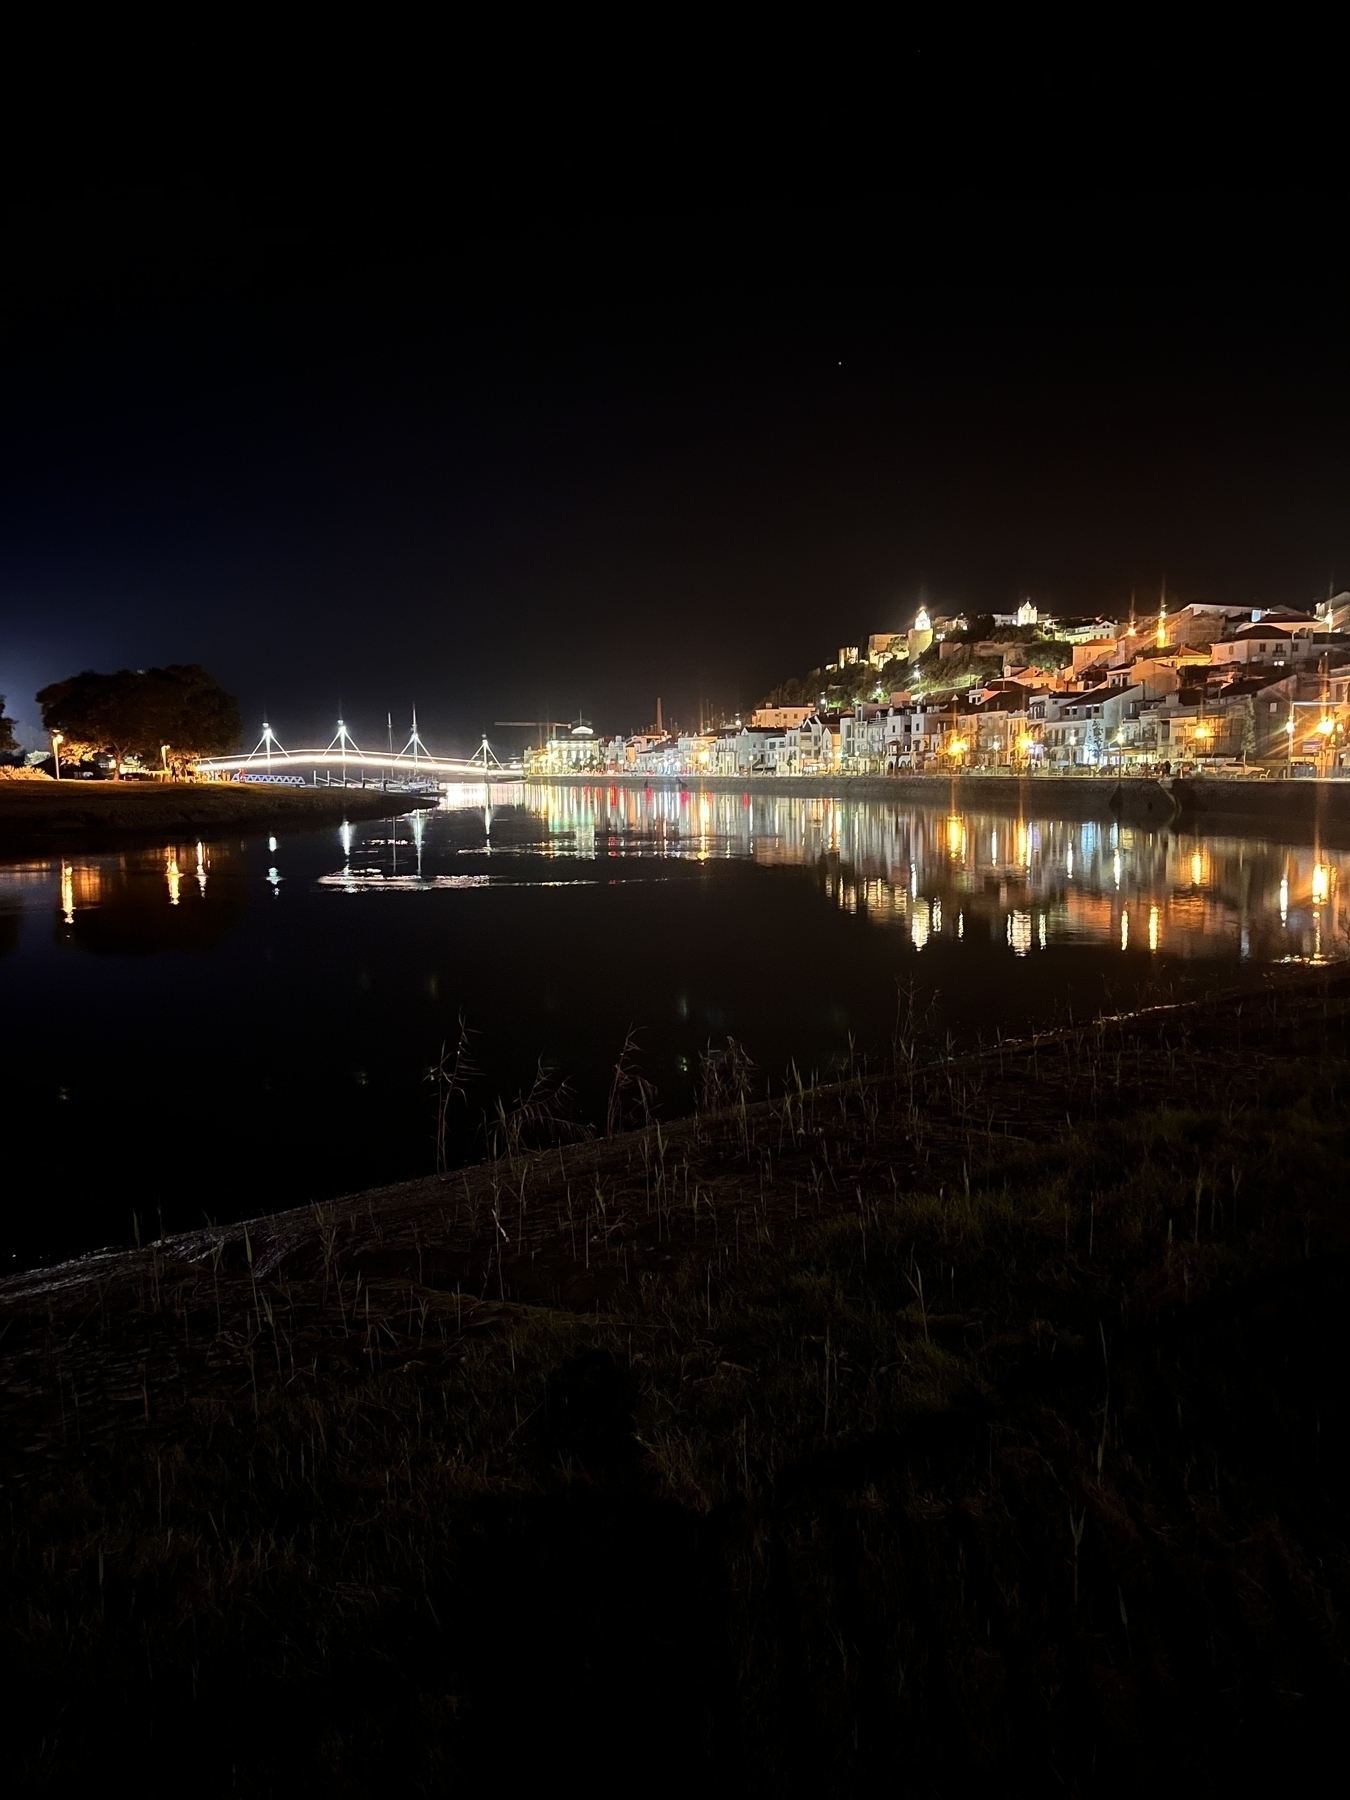 The town of Alcácer do Sal in Portugal at night time, taken from by the river looking up the hill, all lit up